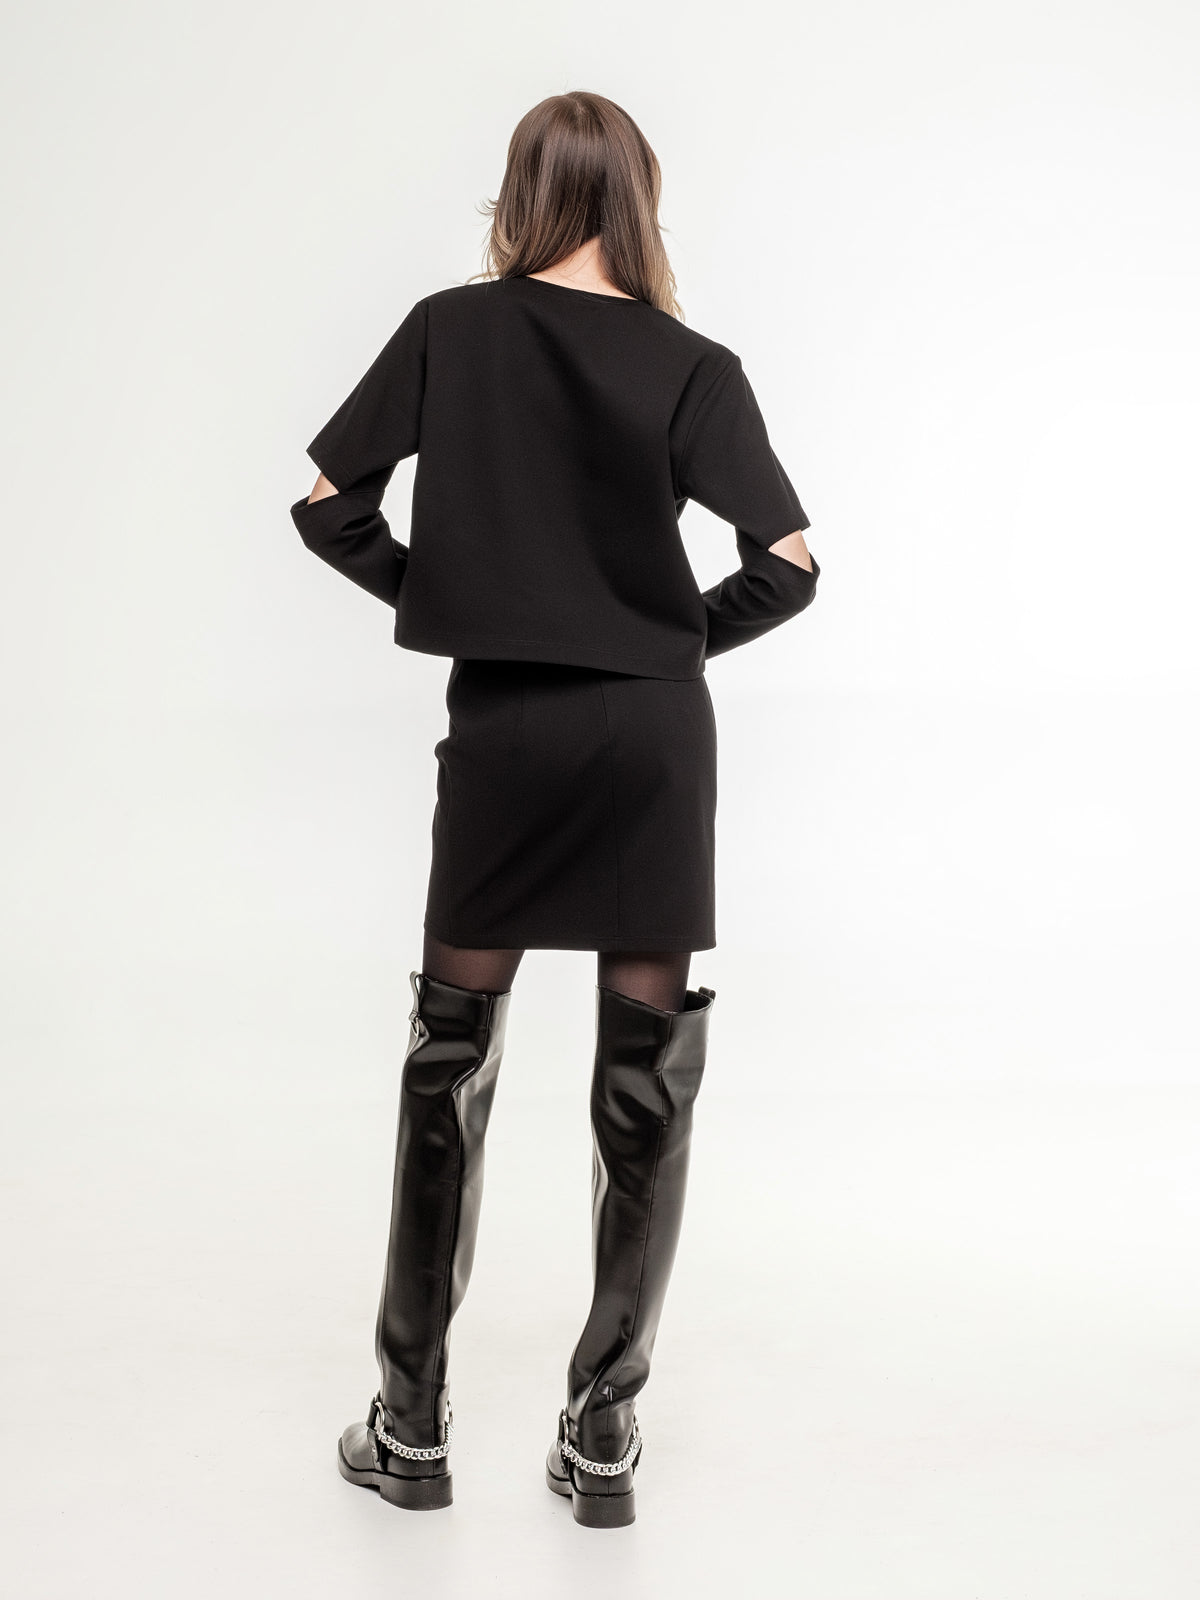 black top with long sleeves elbow cuts  and mini black skirt from the back